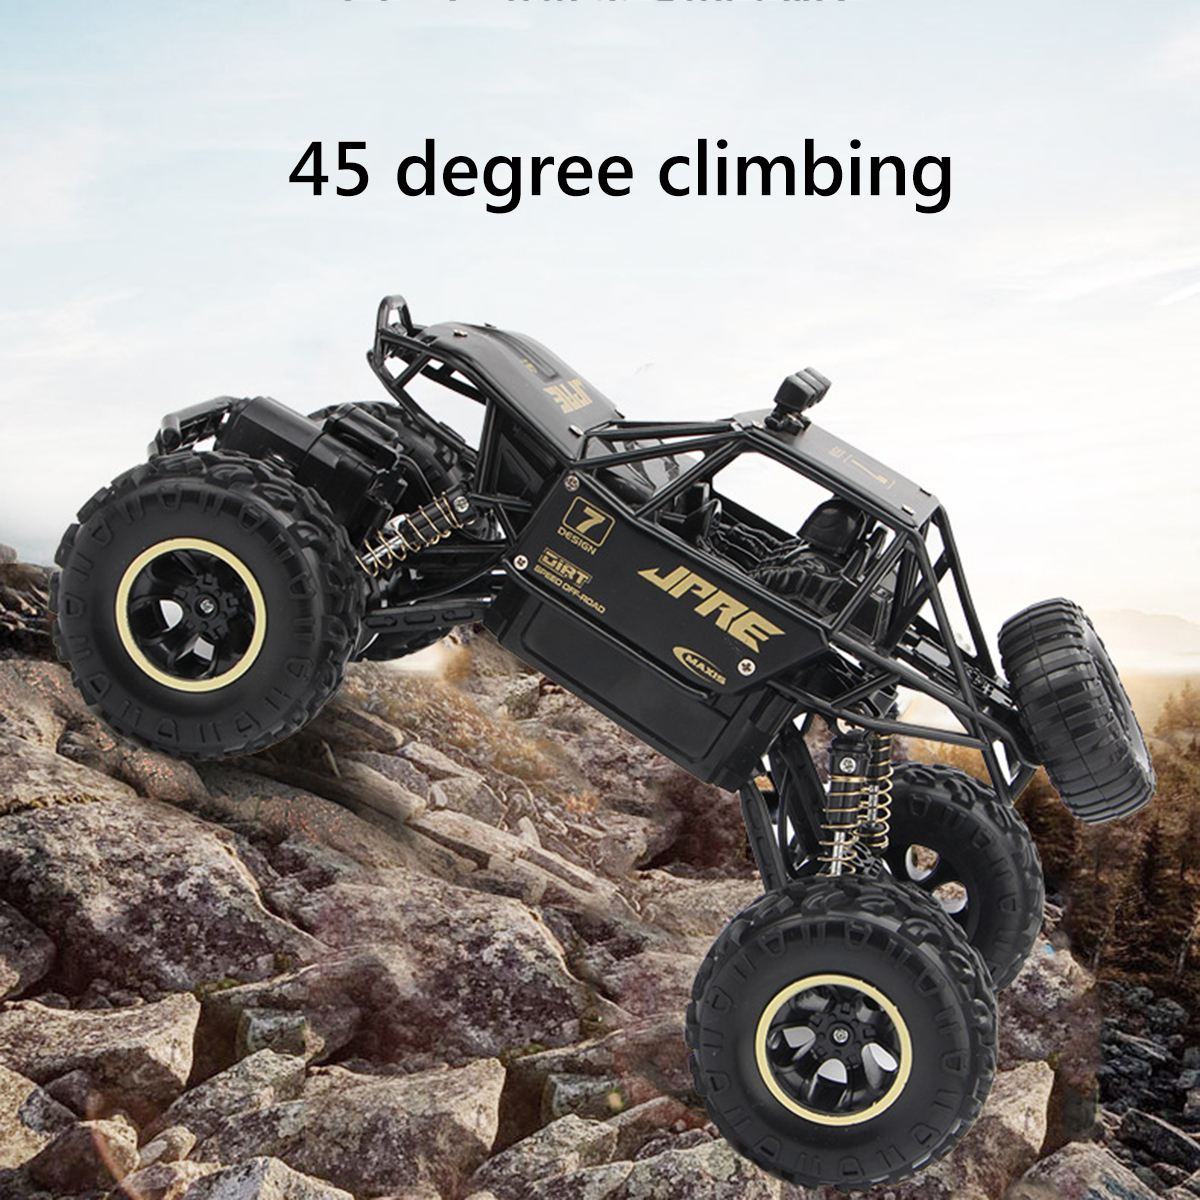 1:16 Alloy Remote Controls Car Monster Trucks, 4WD Climbing RC Cars Off Road, RC Crawler Toys for Boys Kids Gifts - image 5 of 11